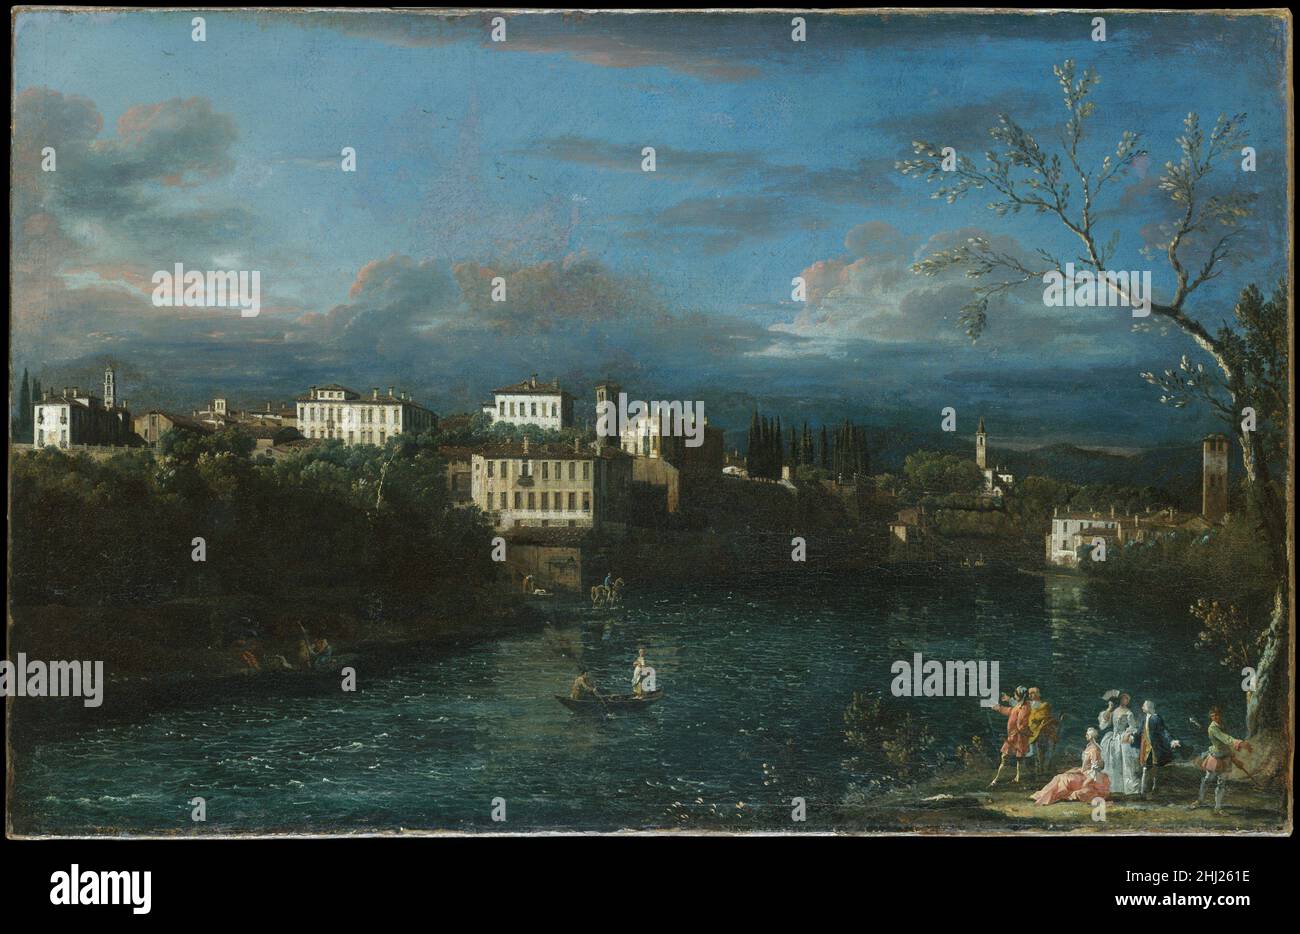 Vaprio d'Adda 1744 Bernardo Bellotto Italian By carefully staging the sunlight hitting the facades rising above the Adda River, Bellotto picks out the village of Canonica d'Adda at the right and Vaprio at the center. Located northeast of Milan, Vaprio was the site of Villa Melzi, where Leonardo da Vinci visited his pupil Francesco Melzi. On related drawings, Bellotto noted that this painting and its pendant were made in 1744 for Count Simonetta in Milan. The pendant, now in the Museo di Capodimonte, Naples, depicts the landscape from the opposite direction.. Vaprio d'Adda. Bernardo Bellotto (I Stock Photo